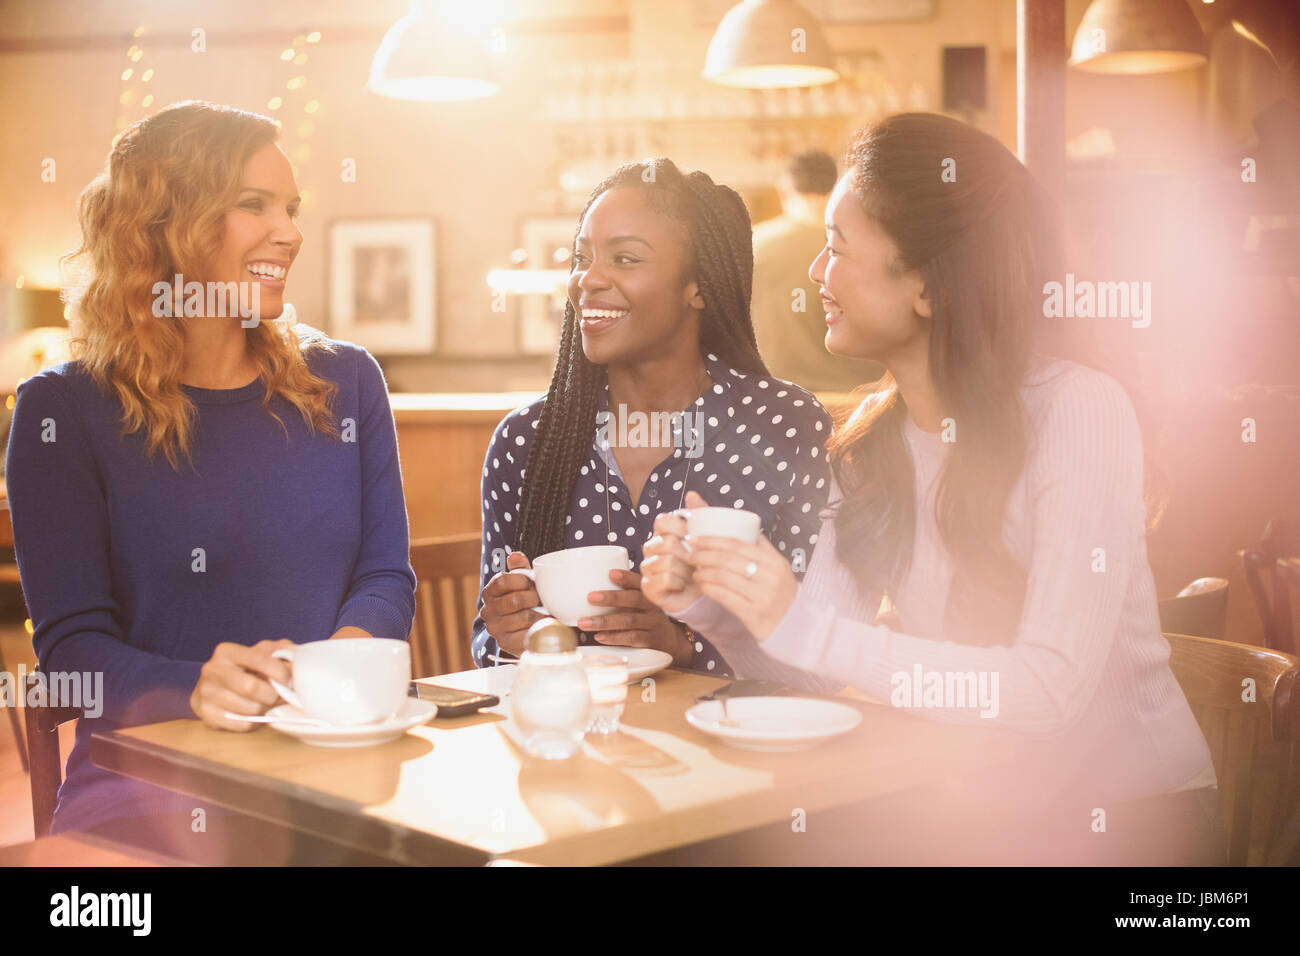 Women friends drinking coffee and talking at cafe table Stock Photo